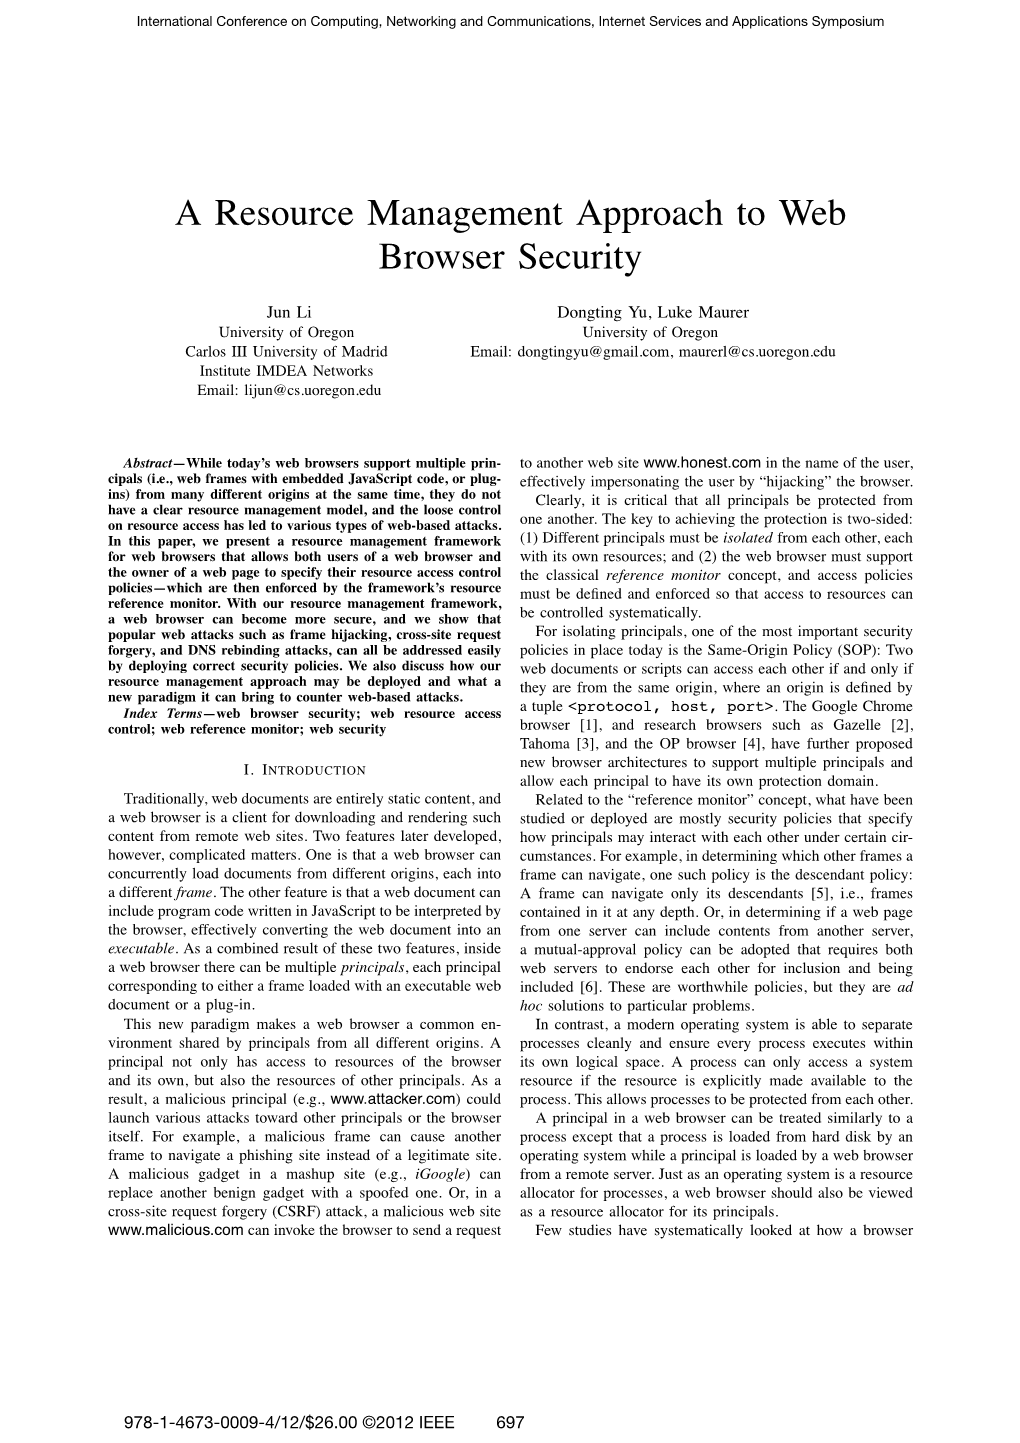 A Resource Management Approach to Web Browser Security